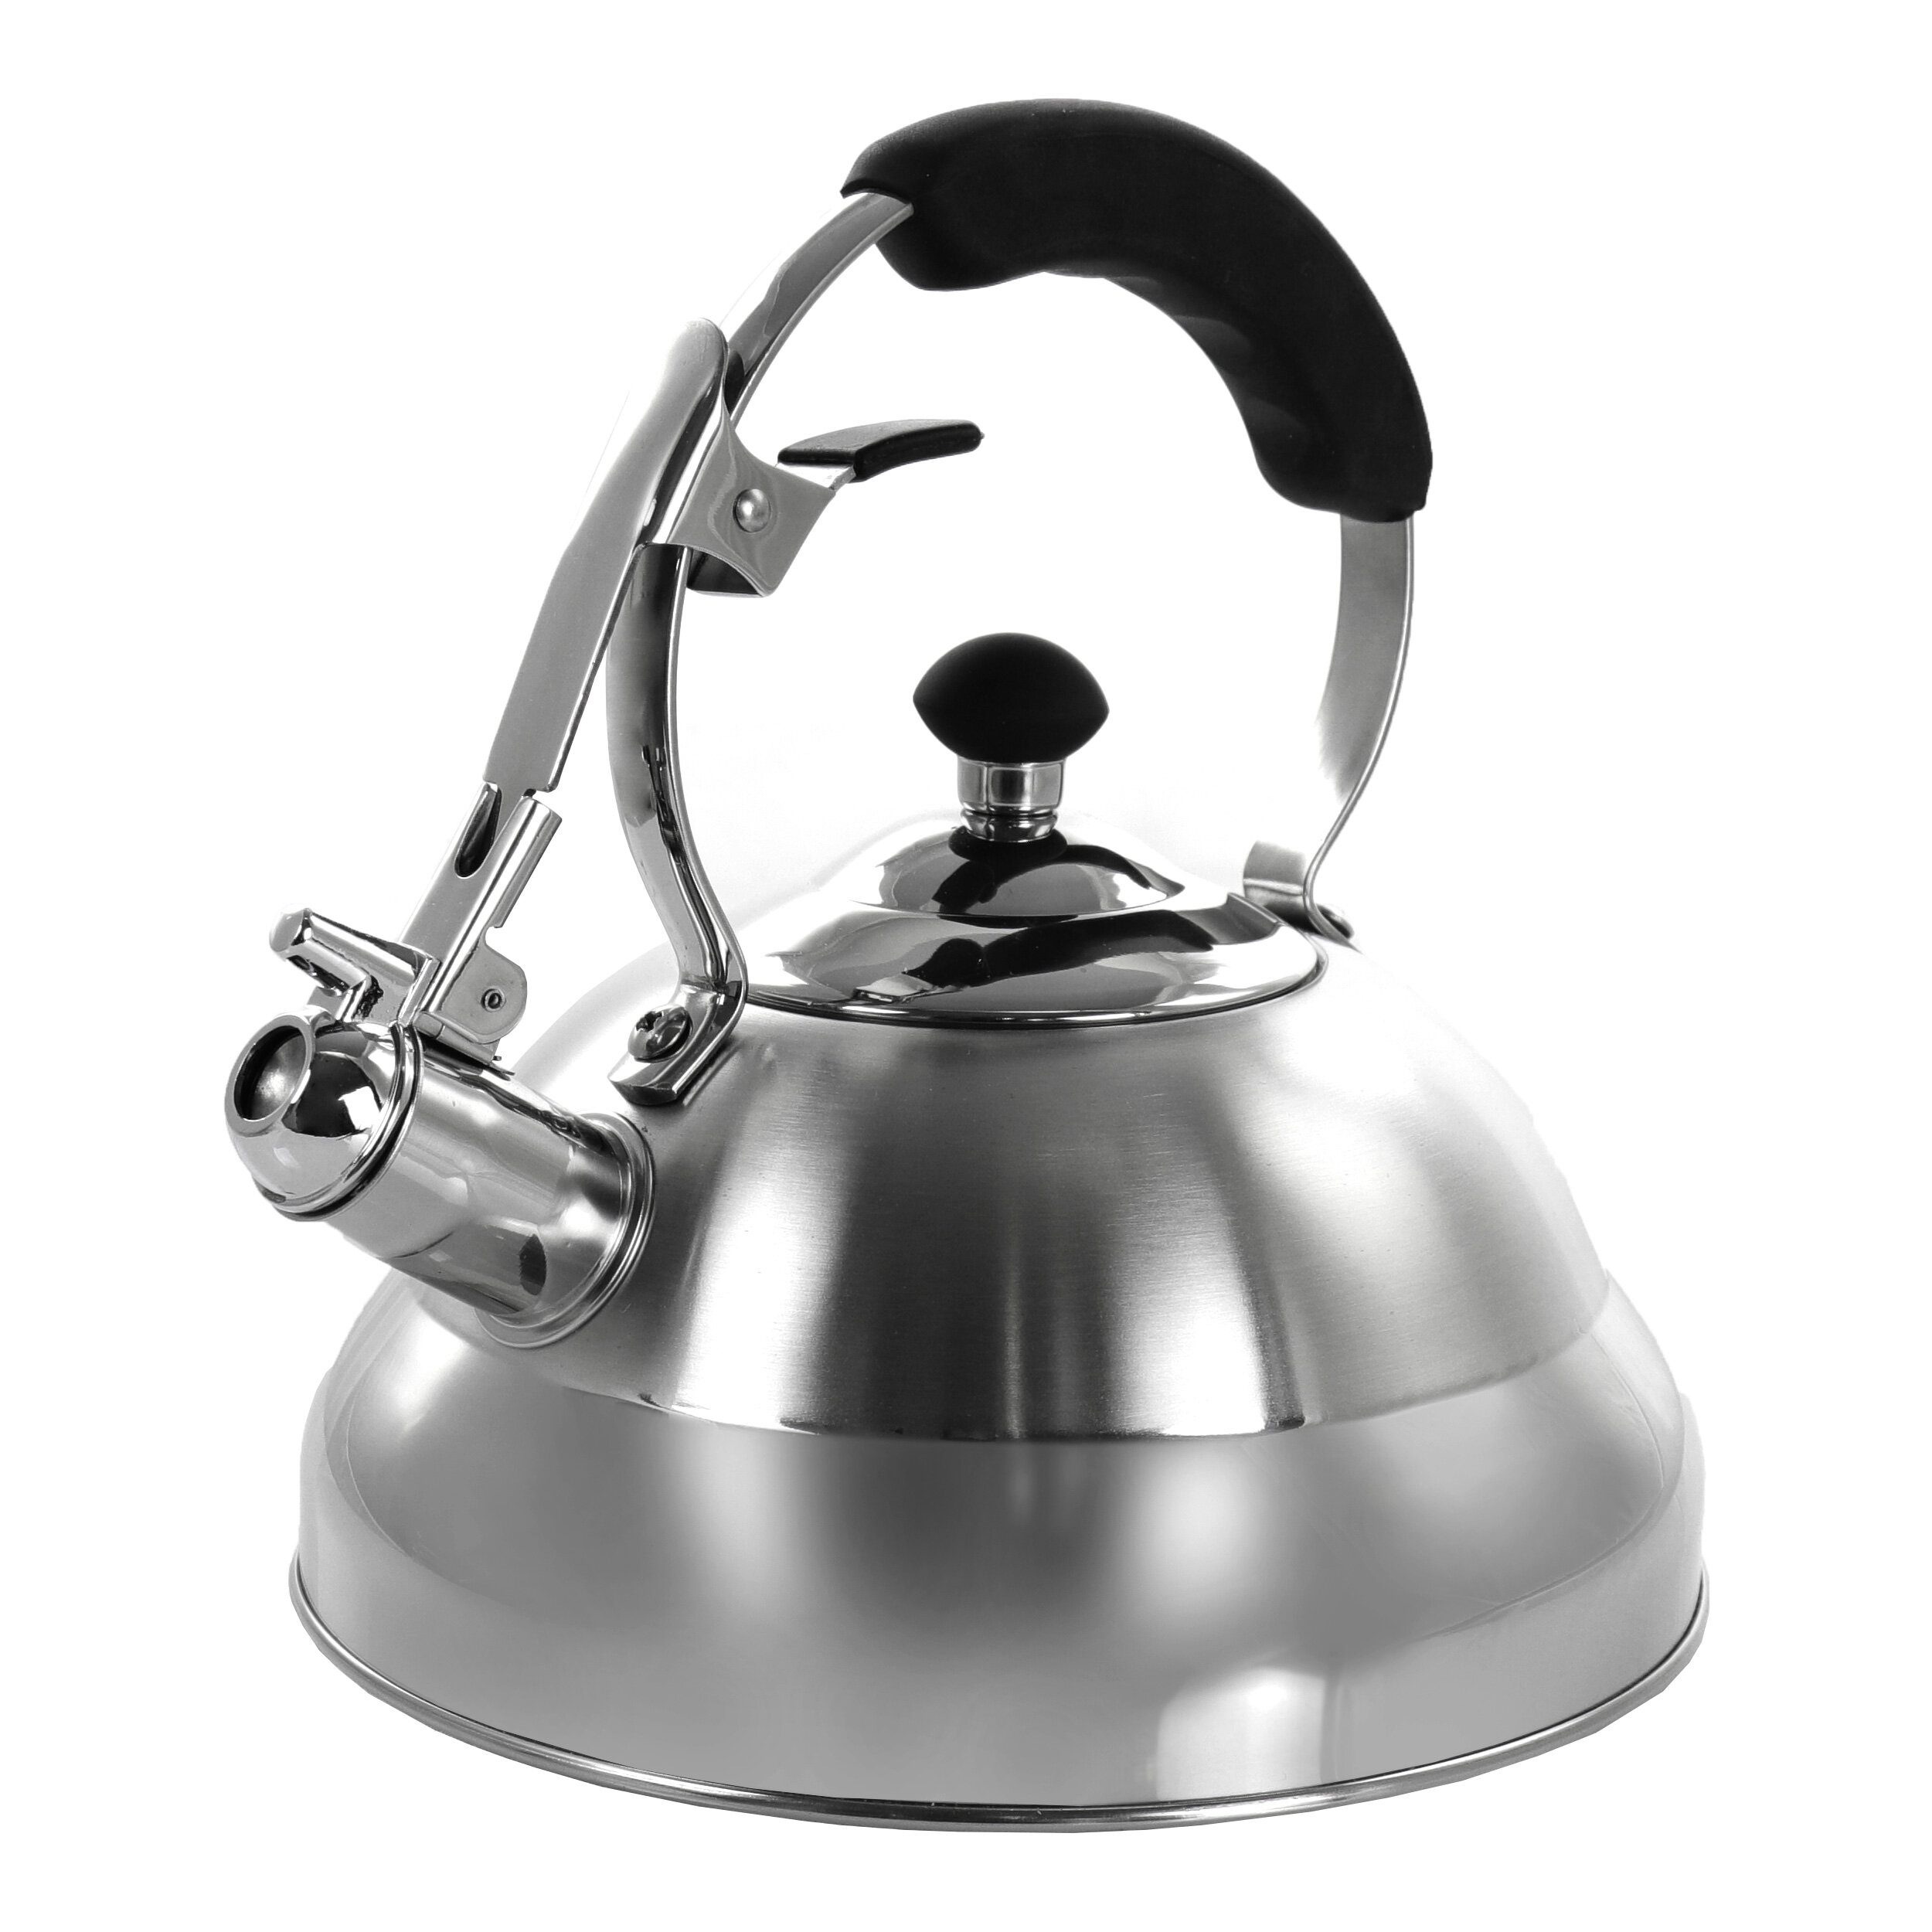 New 2l Stainless Steel Whistling Tea Kettle Food Grade Teapot For Make Tea  Boil Water Compatible Gas Stoves Induction Cookers - Water Kettles -  AliExpress